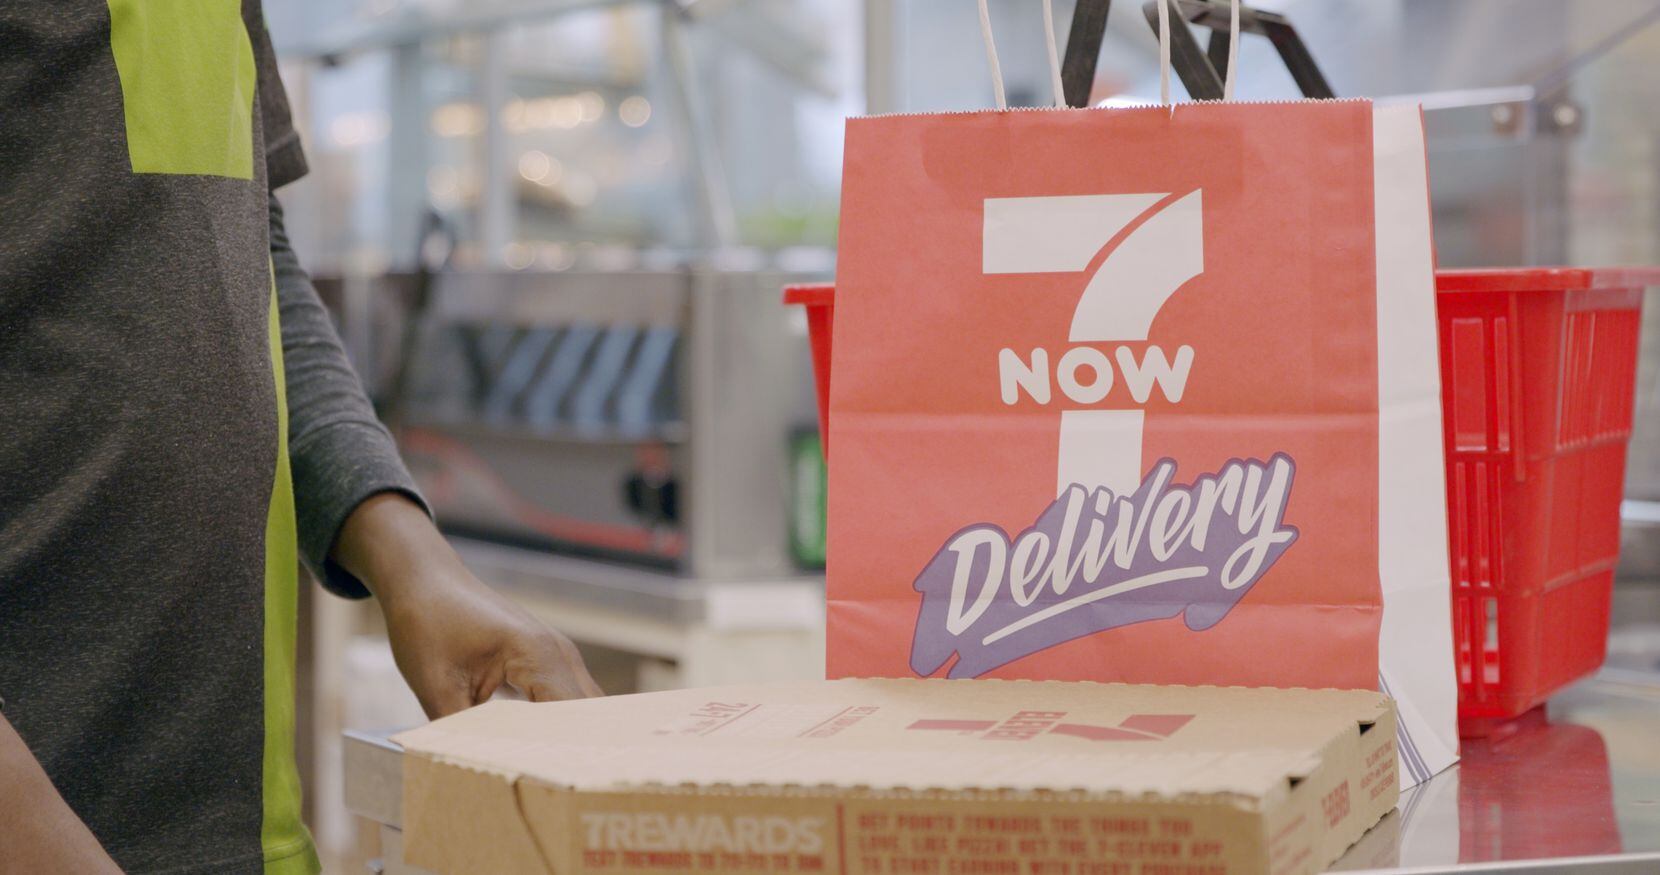 In addition to its proprietary 7Now delivery app, Irving-based 7-Eleven has also partnered...